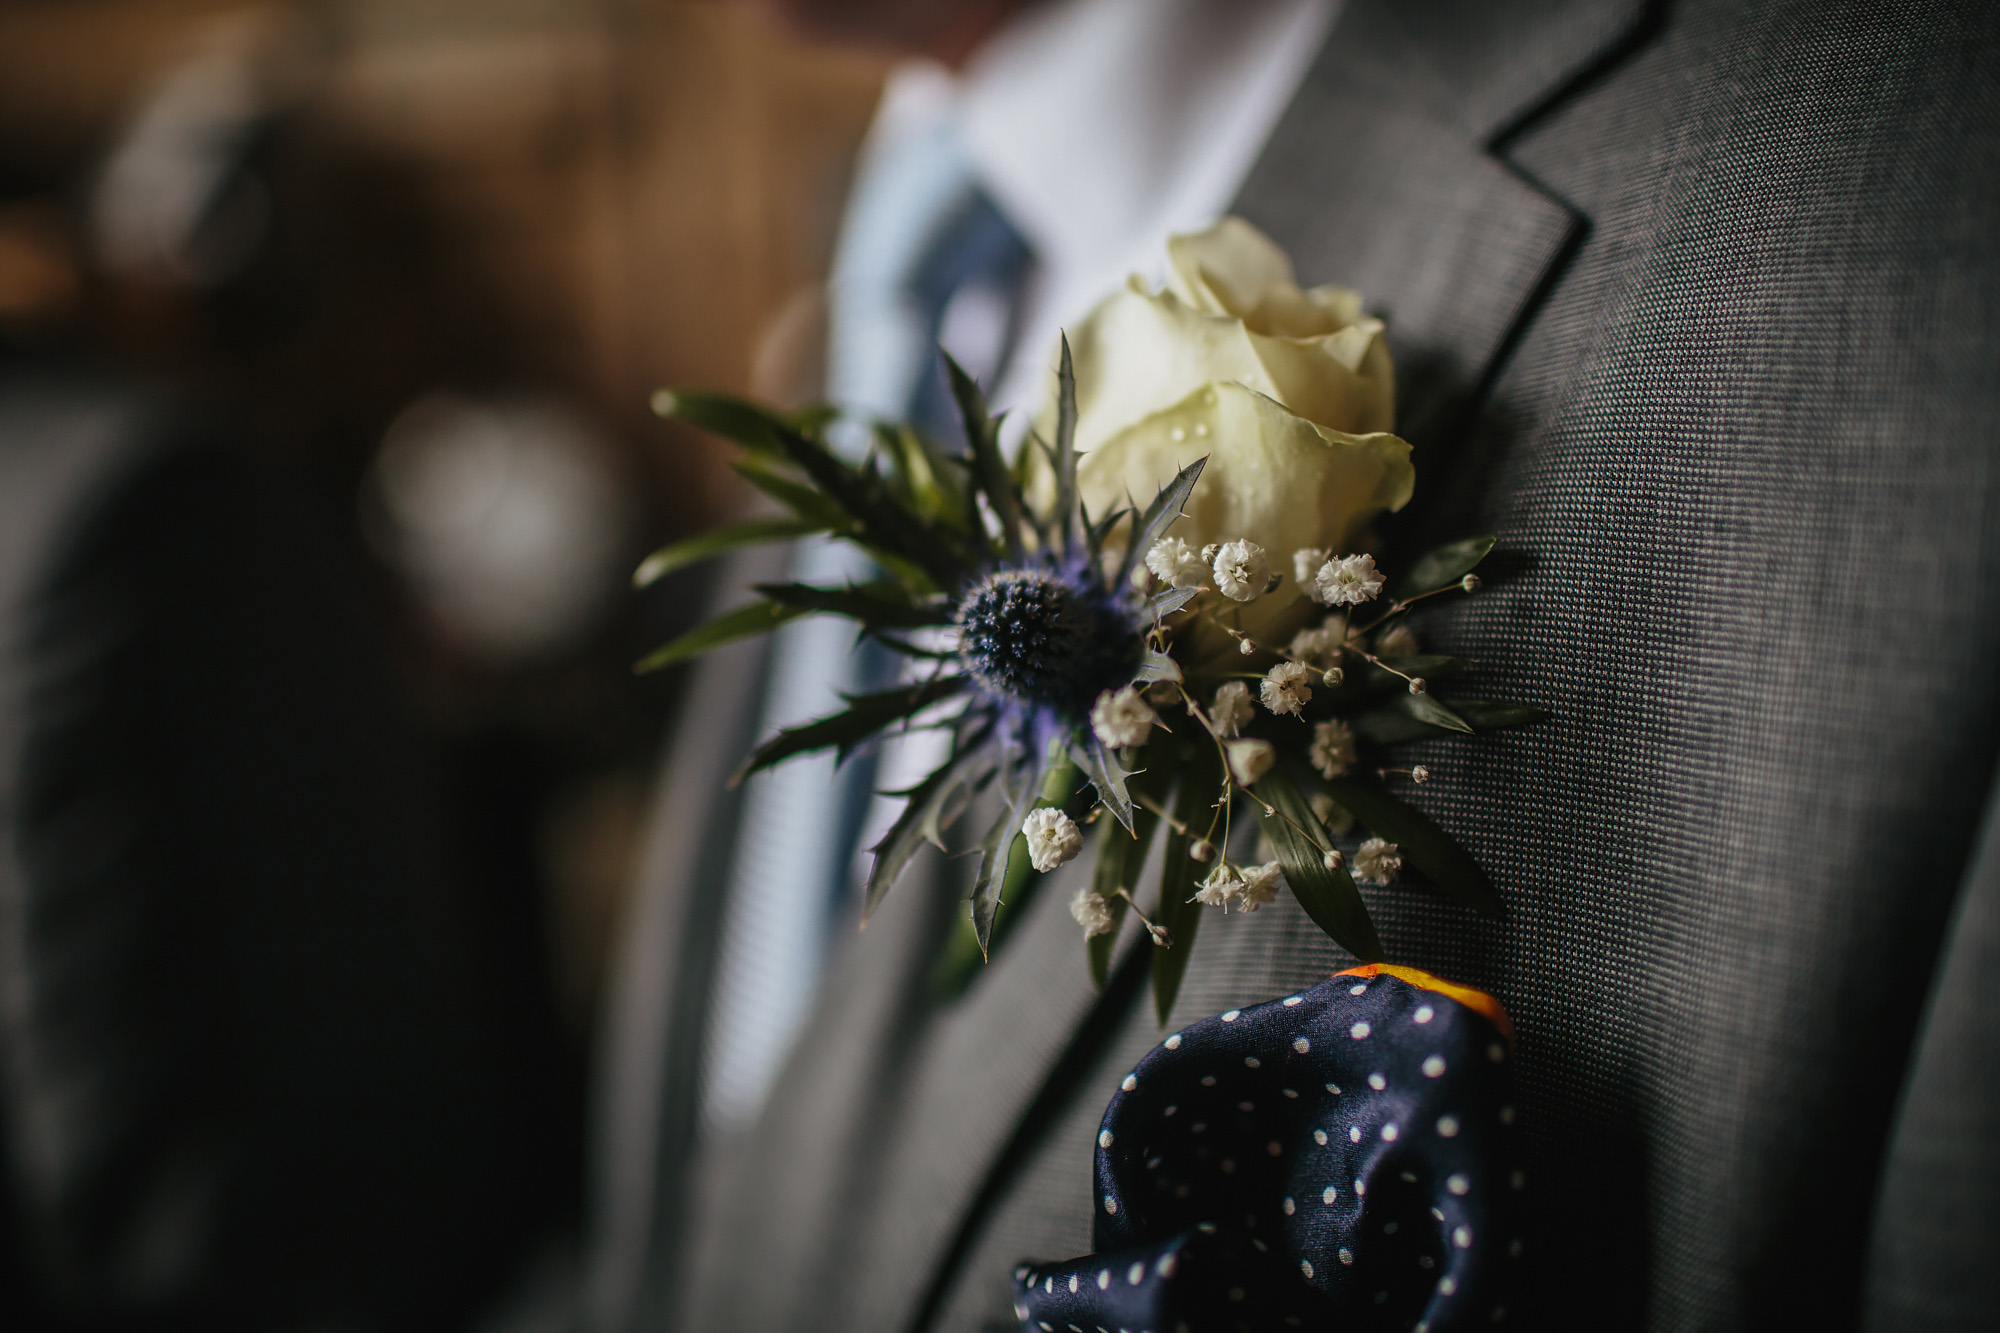 A close up of the grooms buttonhole on his suit